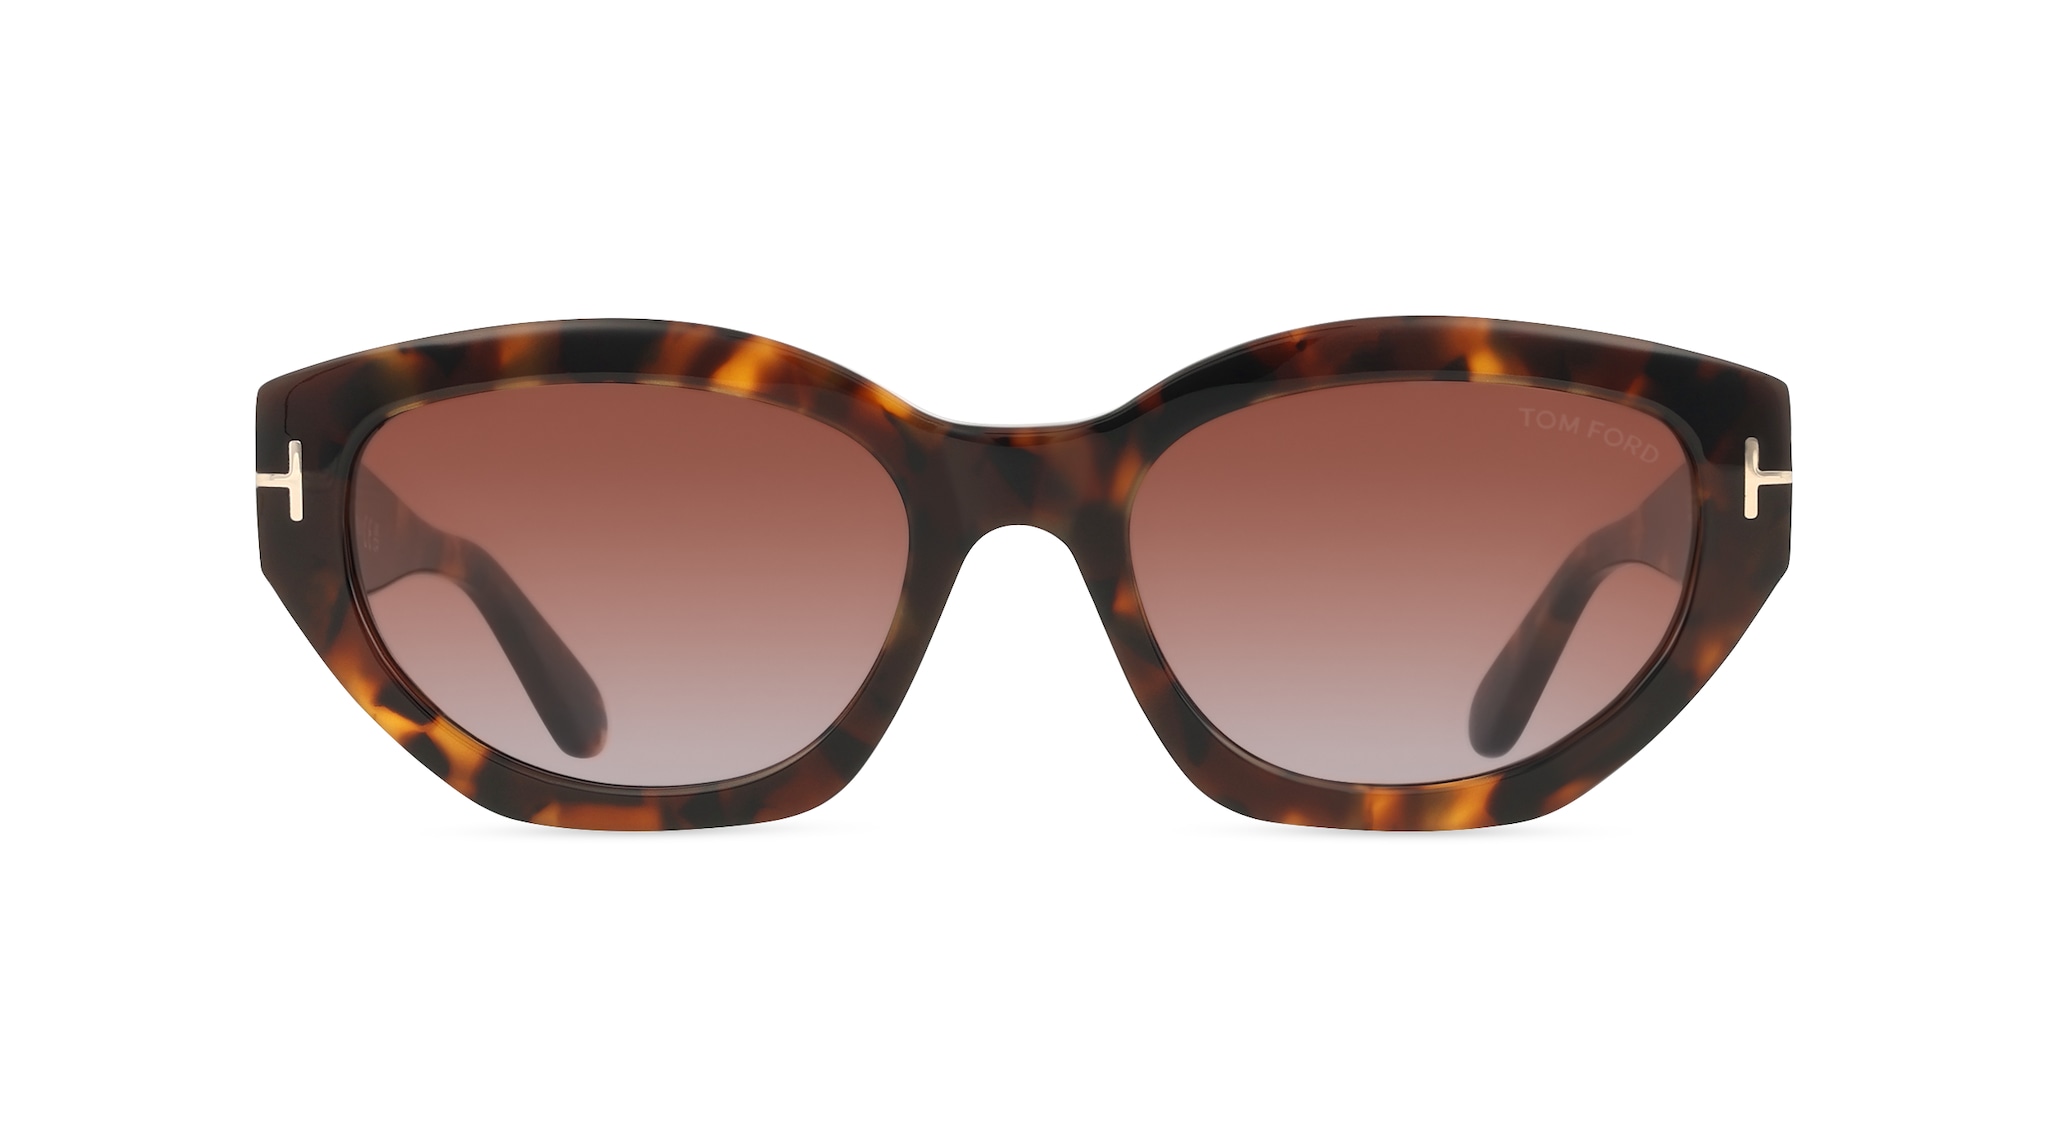 Tom Ford FT1086 PENNY